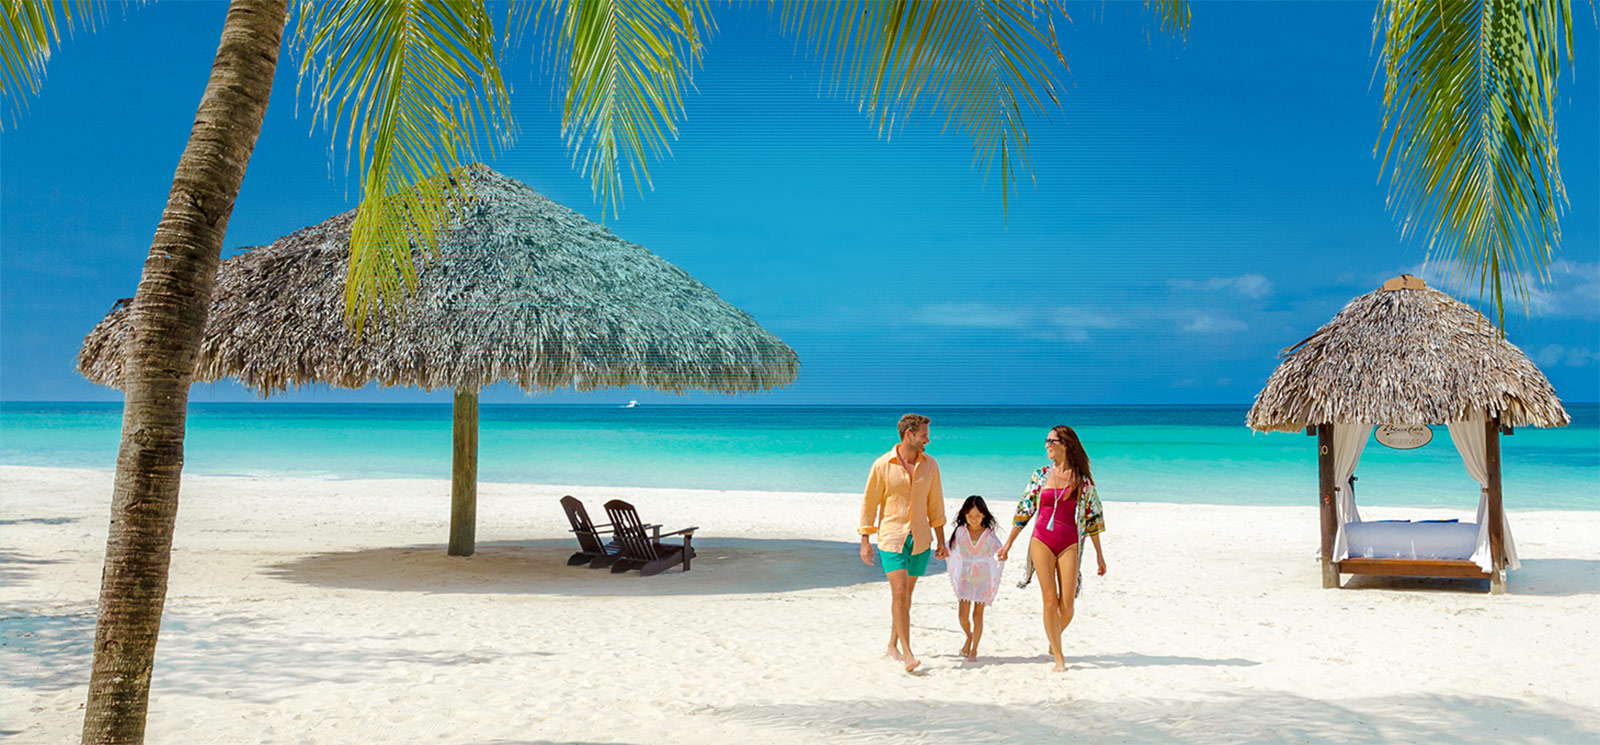 10 Things you Didn't Know about a Sandals or Beaches Vacation!